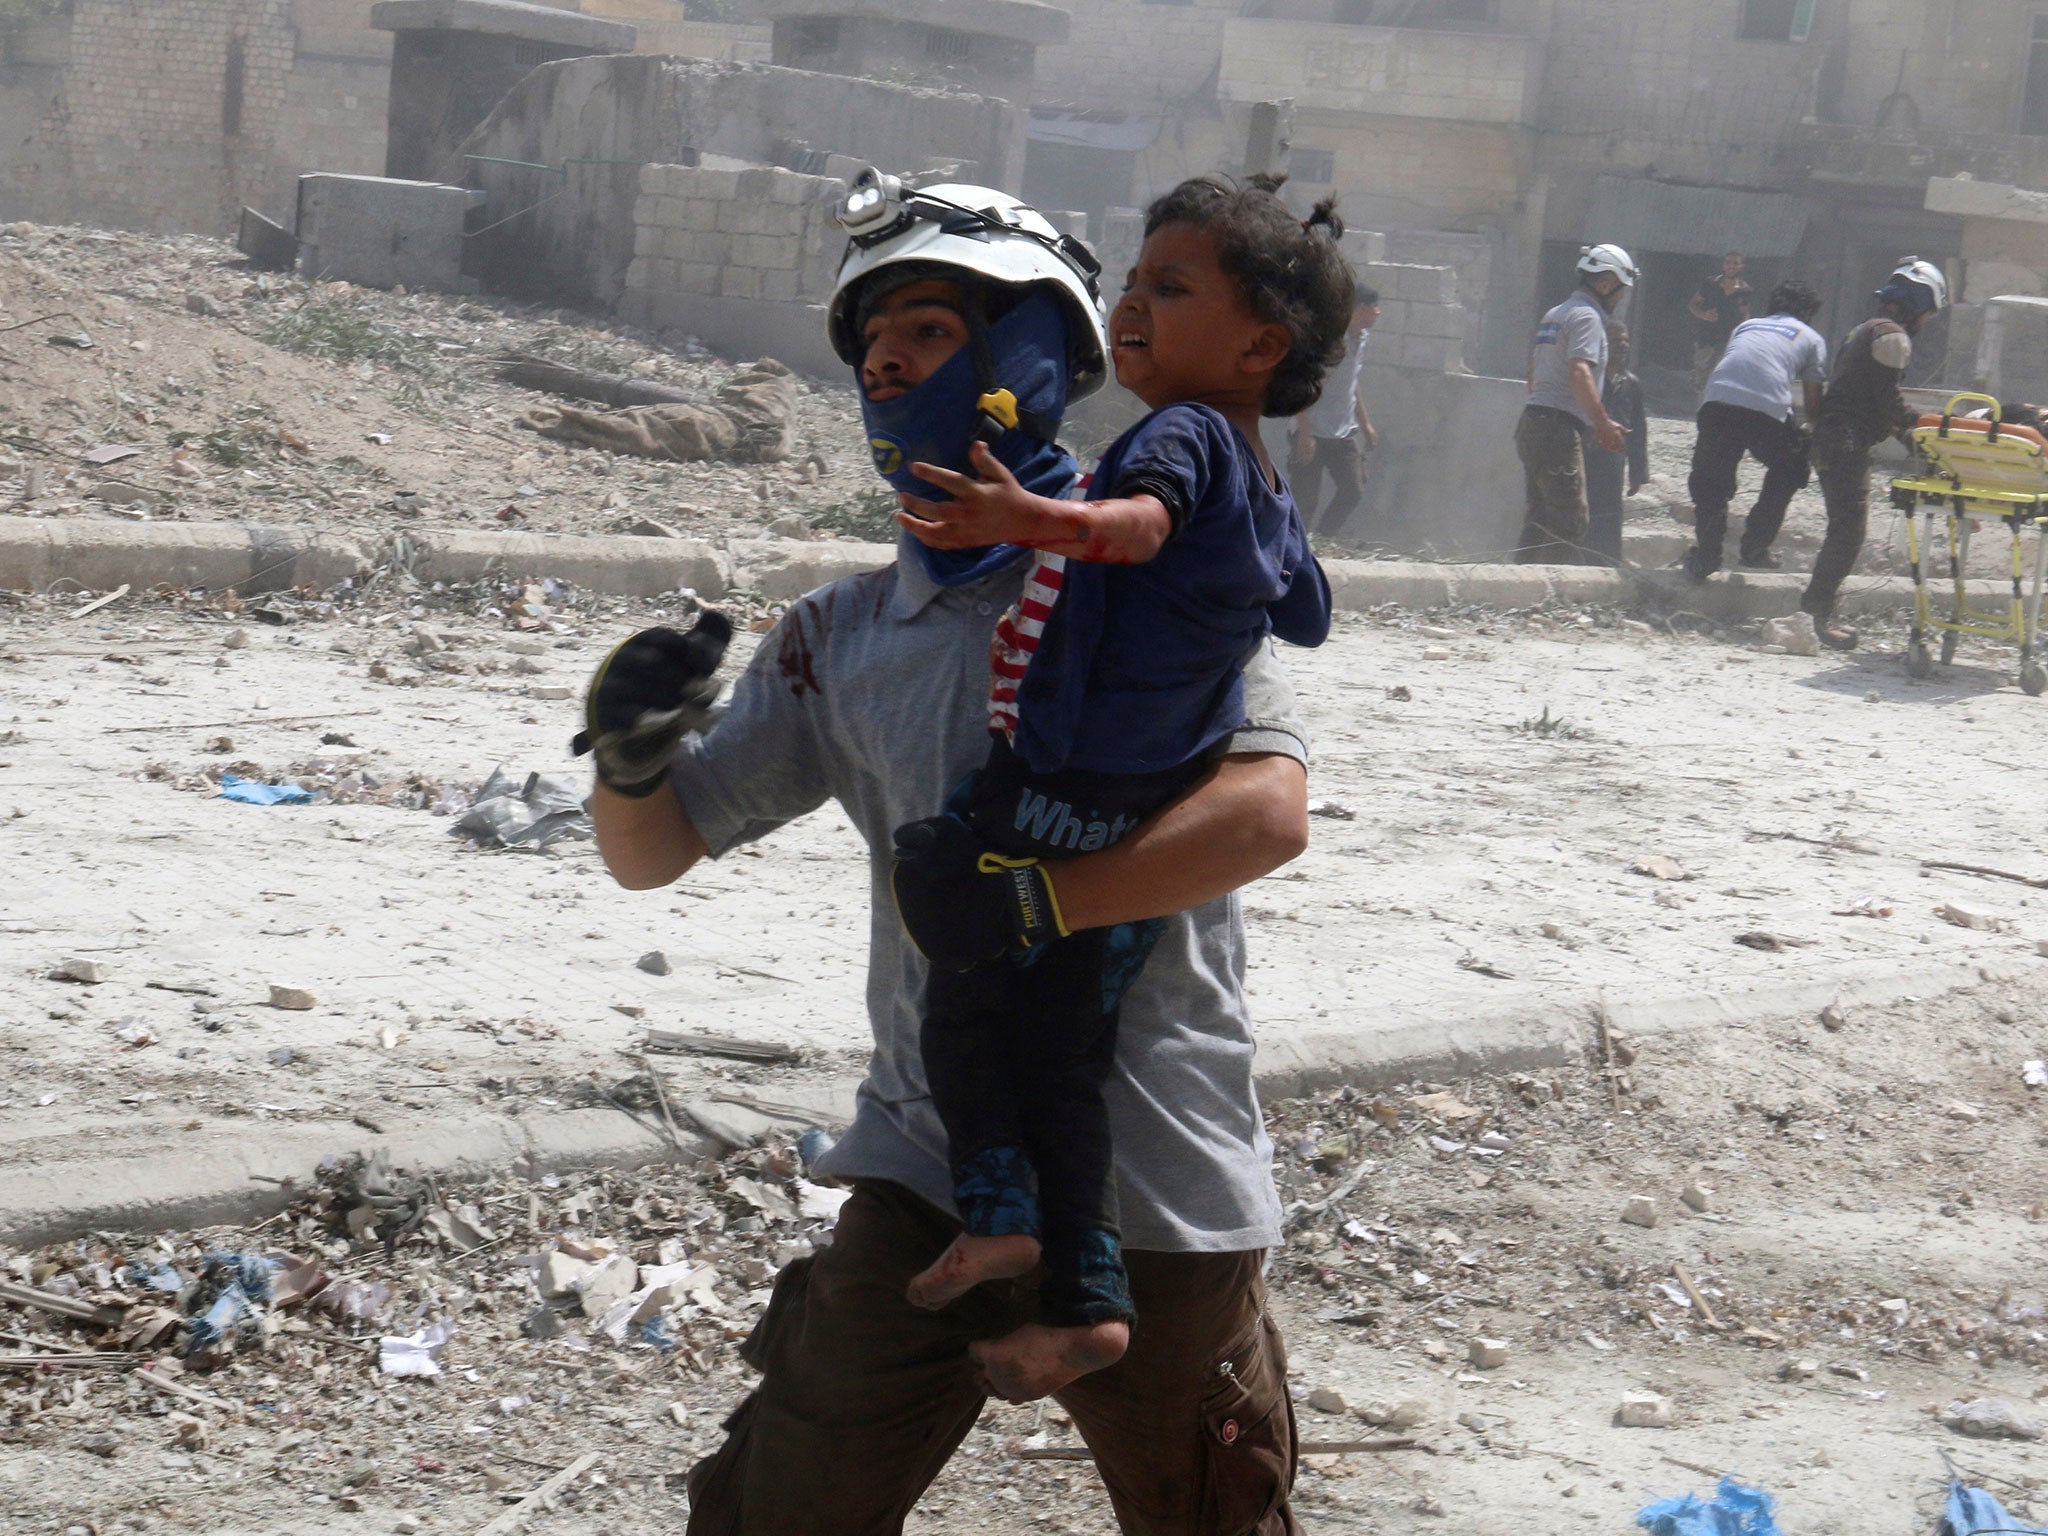 A man carries an injured child after the bombing in the rebel held Bab al-Nayrab neighborhood of Aleppo